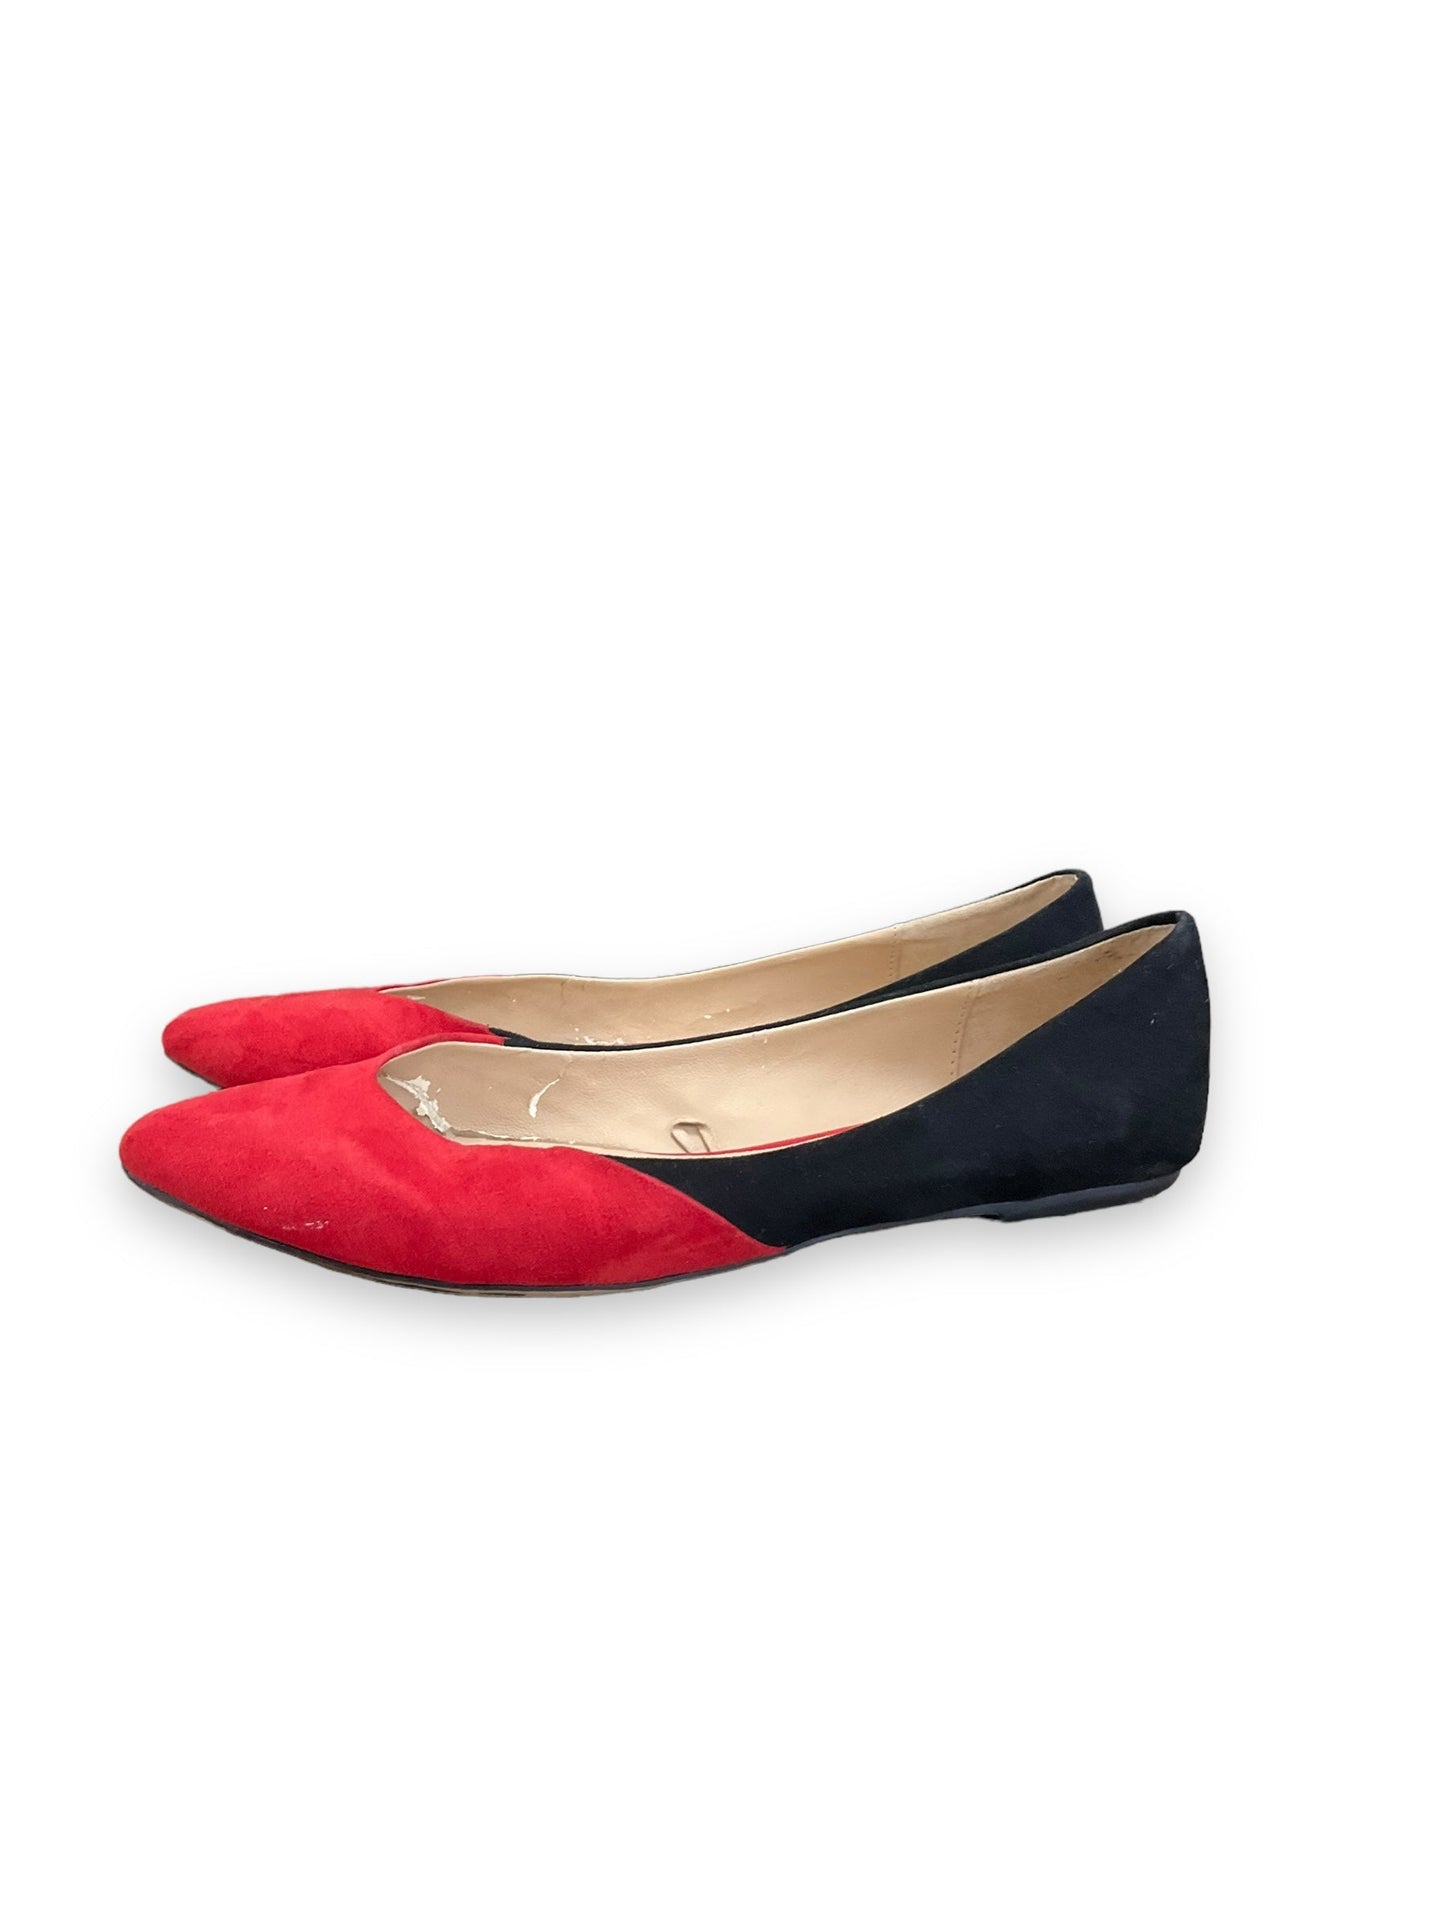 Shoes Flats By Clothes Mentor  Size: 9